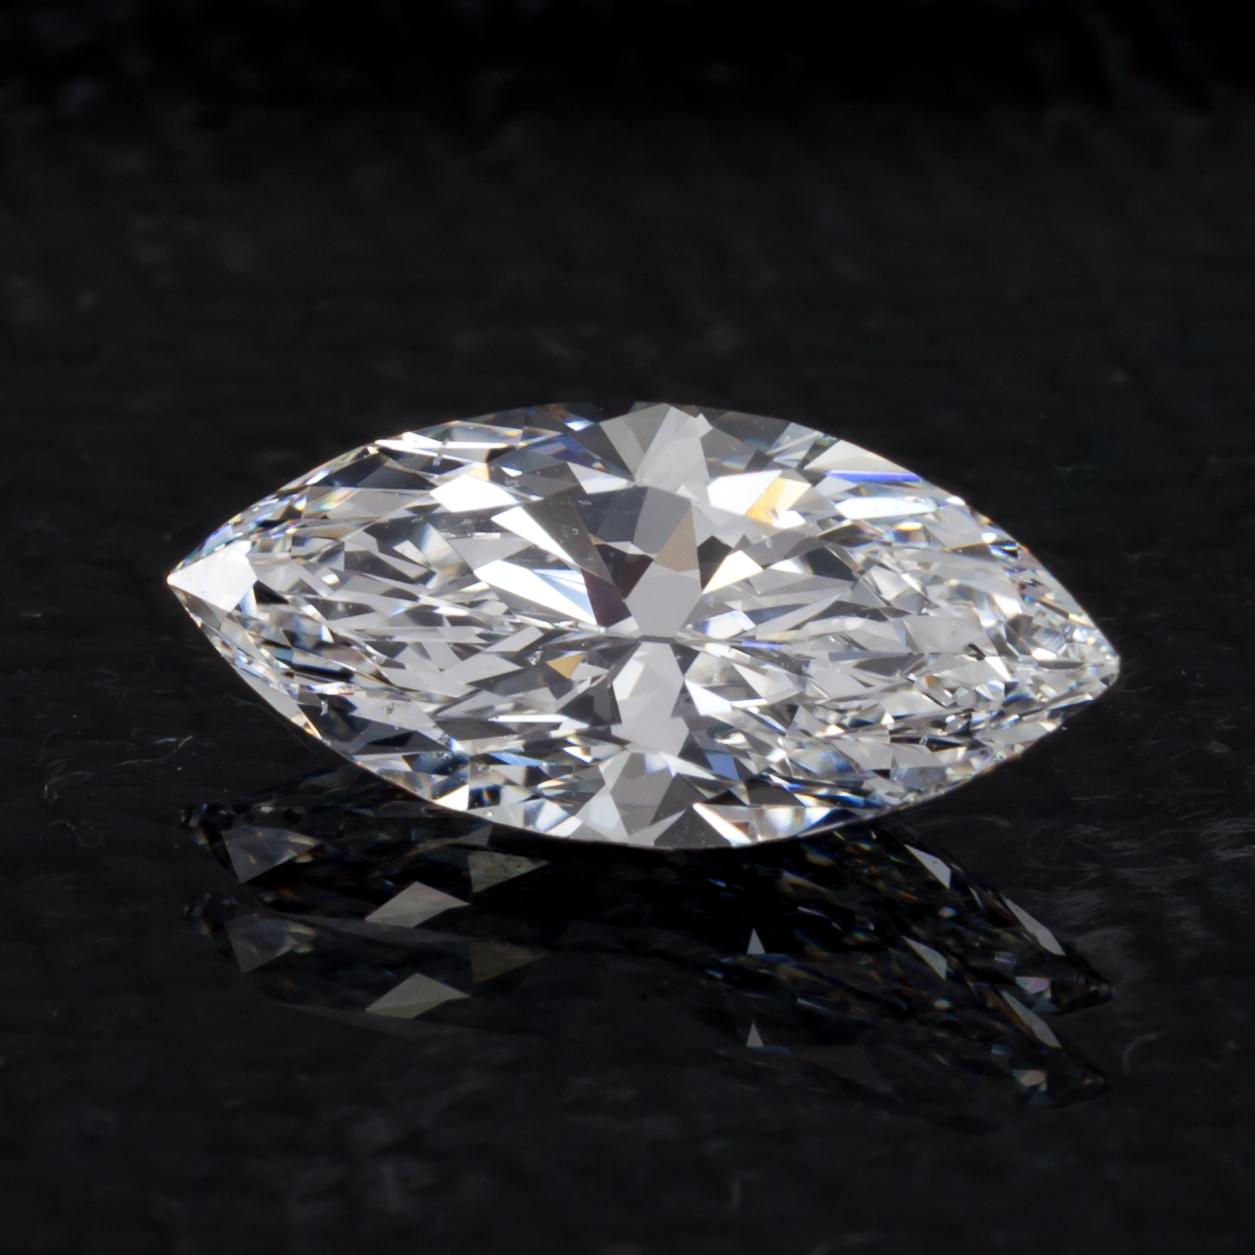 Diamond General Info
GIA Report Number: 6187448186
Diamond Cut: Marquise Brilliant 
Measurements: 12.28 x 5.63 x 3.86 mm

Diamond Grading Results
Carat Weight: 1.58
Color Grade: D
Clarity Grade: SI1

Additional Grading Information 
Polish: Very